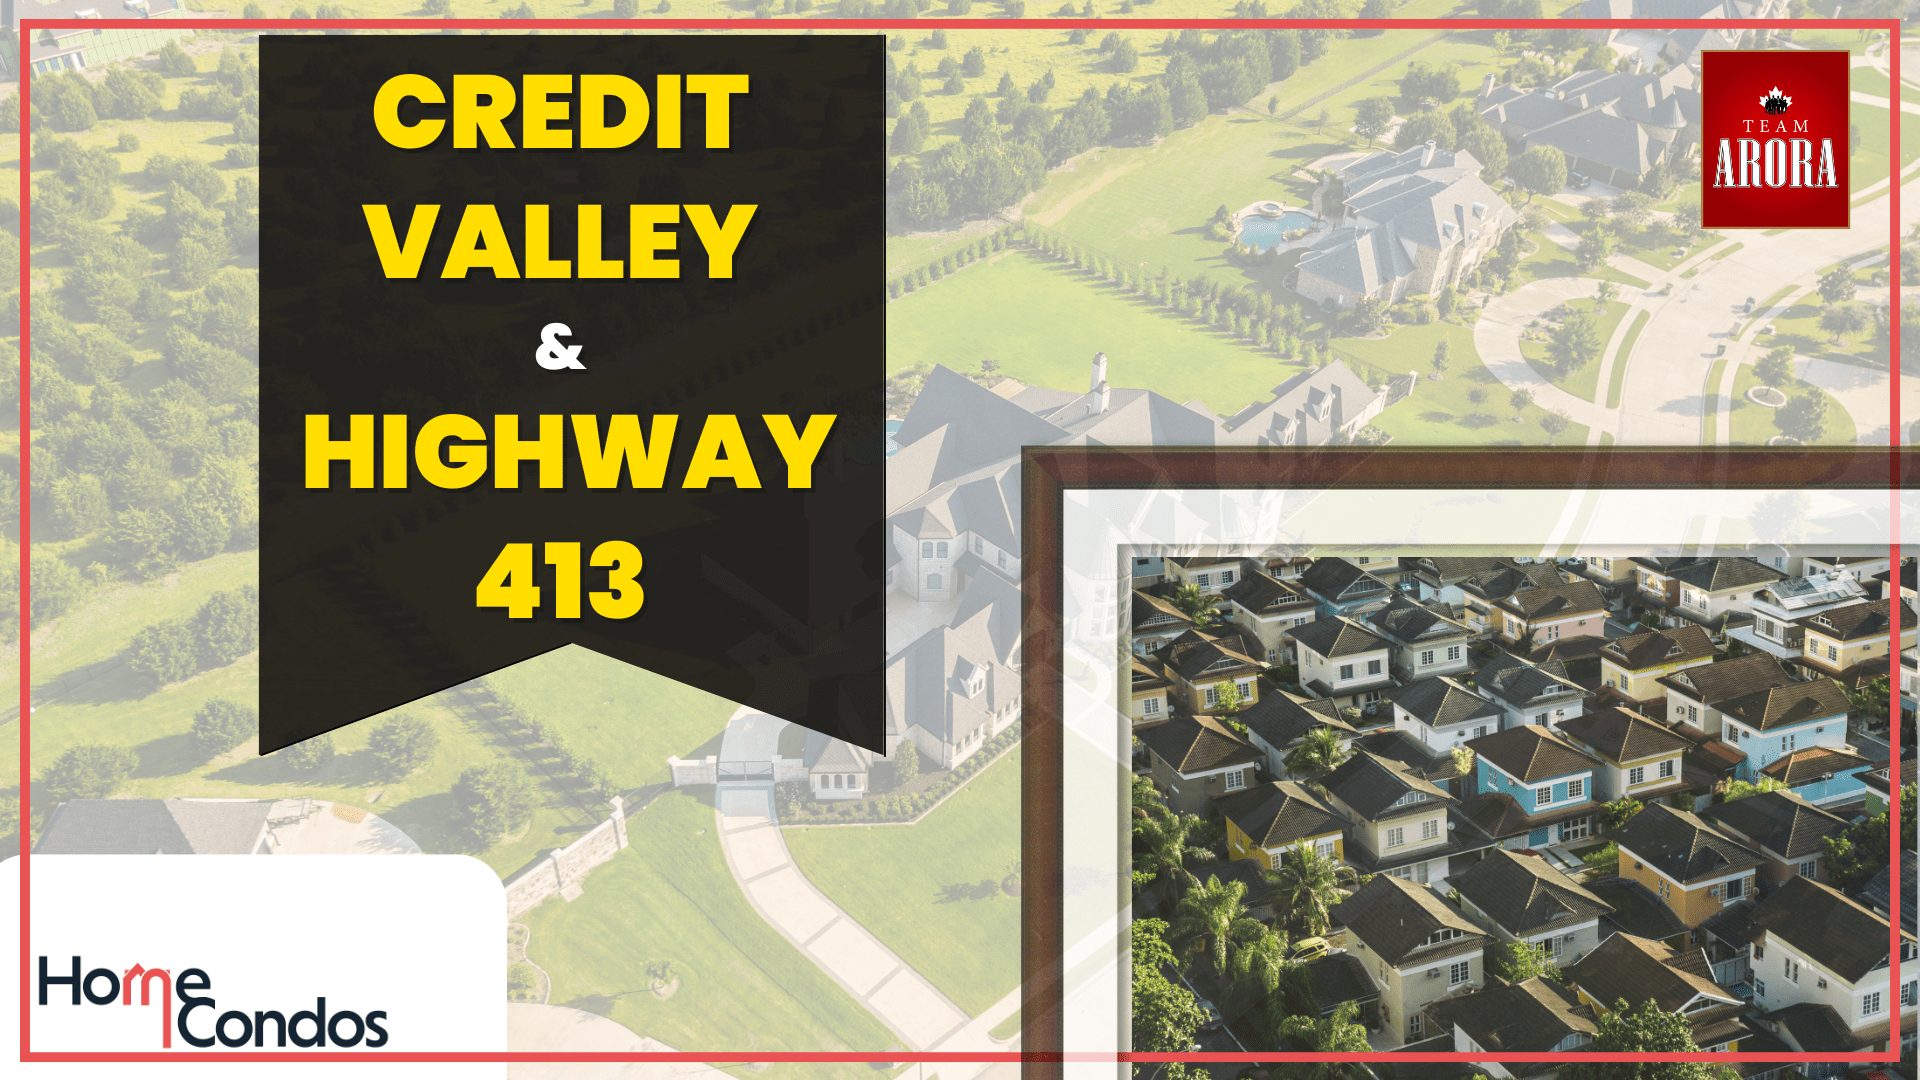 Prime Real Estate Opportunities in Credit Valley and Along the Proposed Highway 413